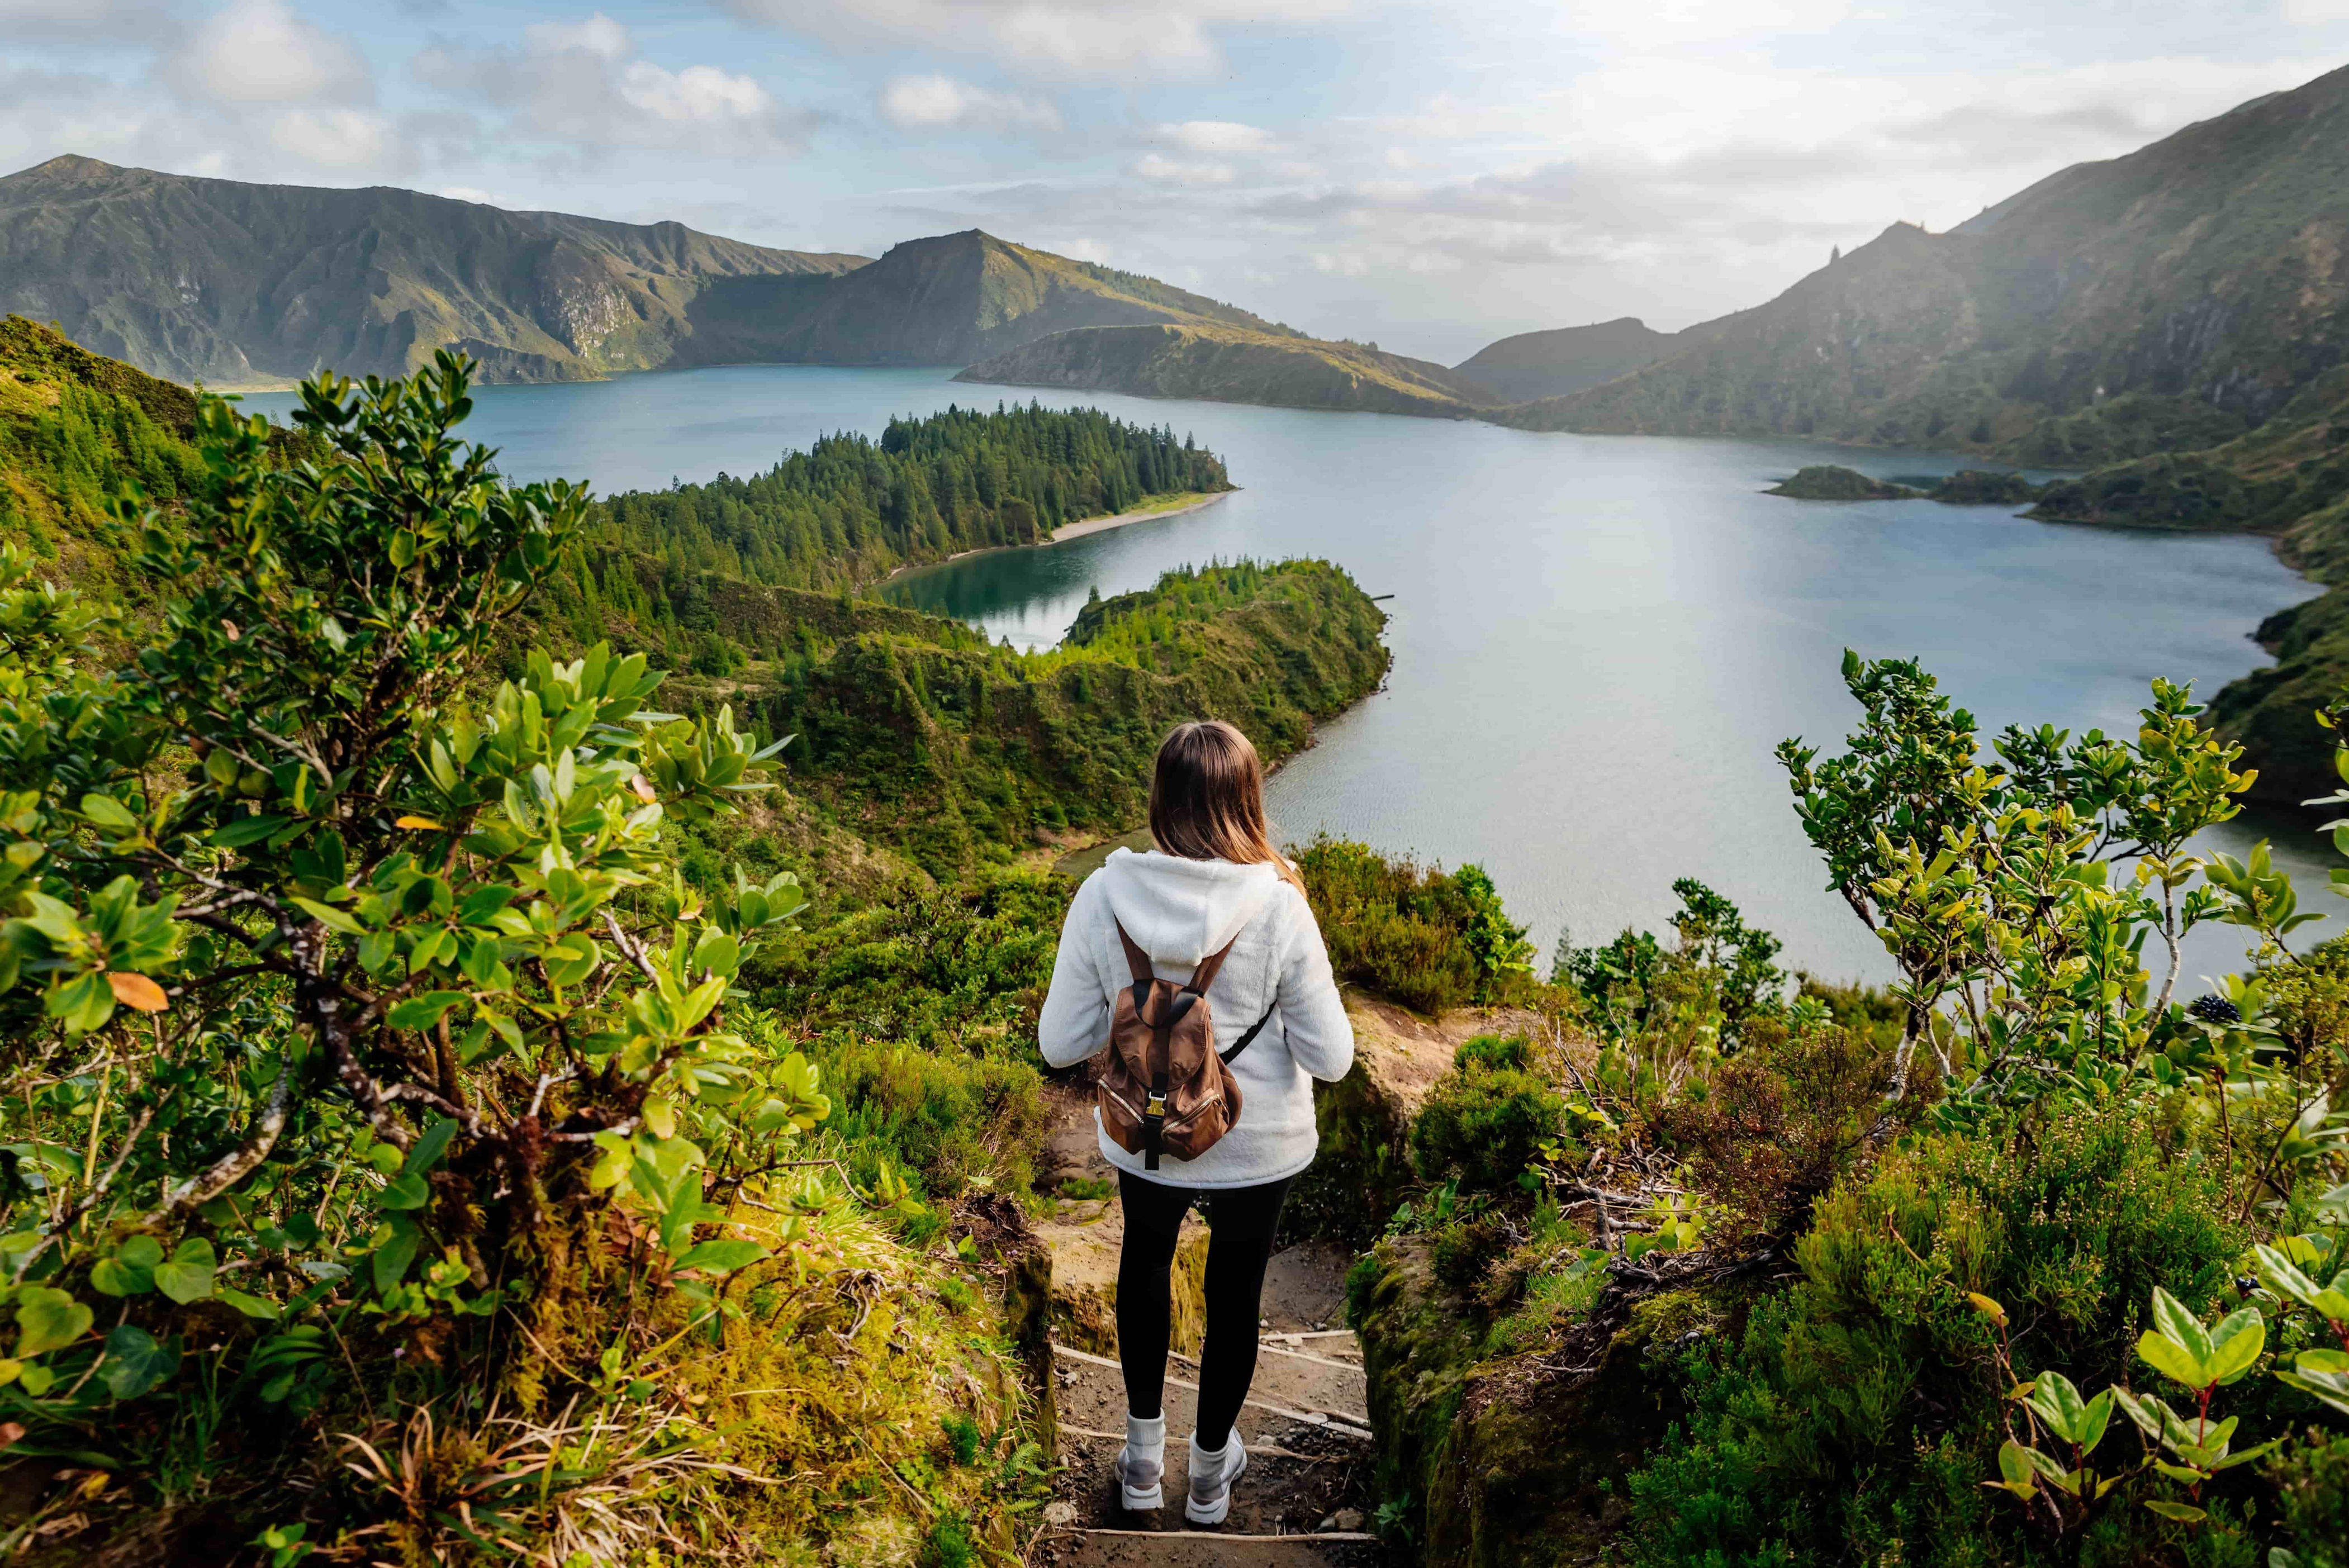 The biggest island in the Azores archipelago, São Miguel is nicknamed “The Green Island” (it’s also been called the “<a href="https://www.travelandleisureasia.com/global/destinations/europe/sao-miguel-island-is-called-the-hawaii-of-europe/#:~:text=Destinations-,This%20Island%20Is%20Called%20The%20'Hawaii%20Of%20Europe'%20%E2%80%94%20With,Volcanic%20Peaks%20And%20Beautiful%20Waterfalls&text=The%20largest%20island%20in%20the,its%20most%20pure%2C%20pristine%20stage." rel="noreferrer noopener">Hawaii of Europe</a>”) because of its lush and dramatic landscape featuring black sand beaches. The volcanic crater lake Lagoa do Fogo, at the centre of the island, is considered a must-see because of its beautiful vistas and hiking opportunities. <a href="https://www.visitazores.com/en/experience-the-azores/whale-watching" rel="noreferrer noopener">Whale watching</a> is also a popular activity to book, as the Azores is one of the world’s largest whale sanctuaries, with more than 20 different cetacean species swimming in the waters.